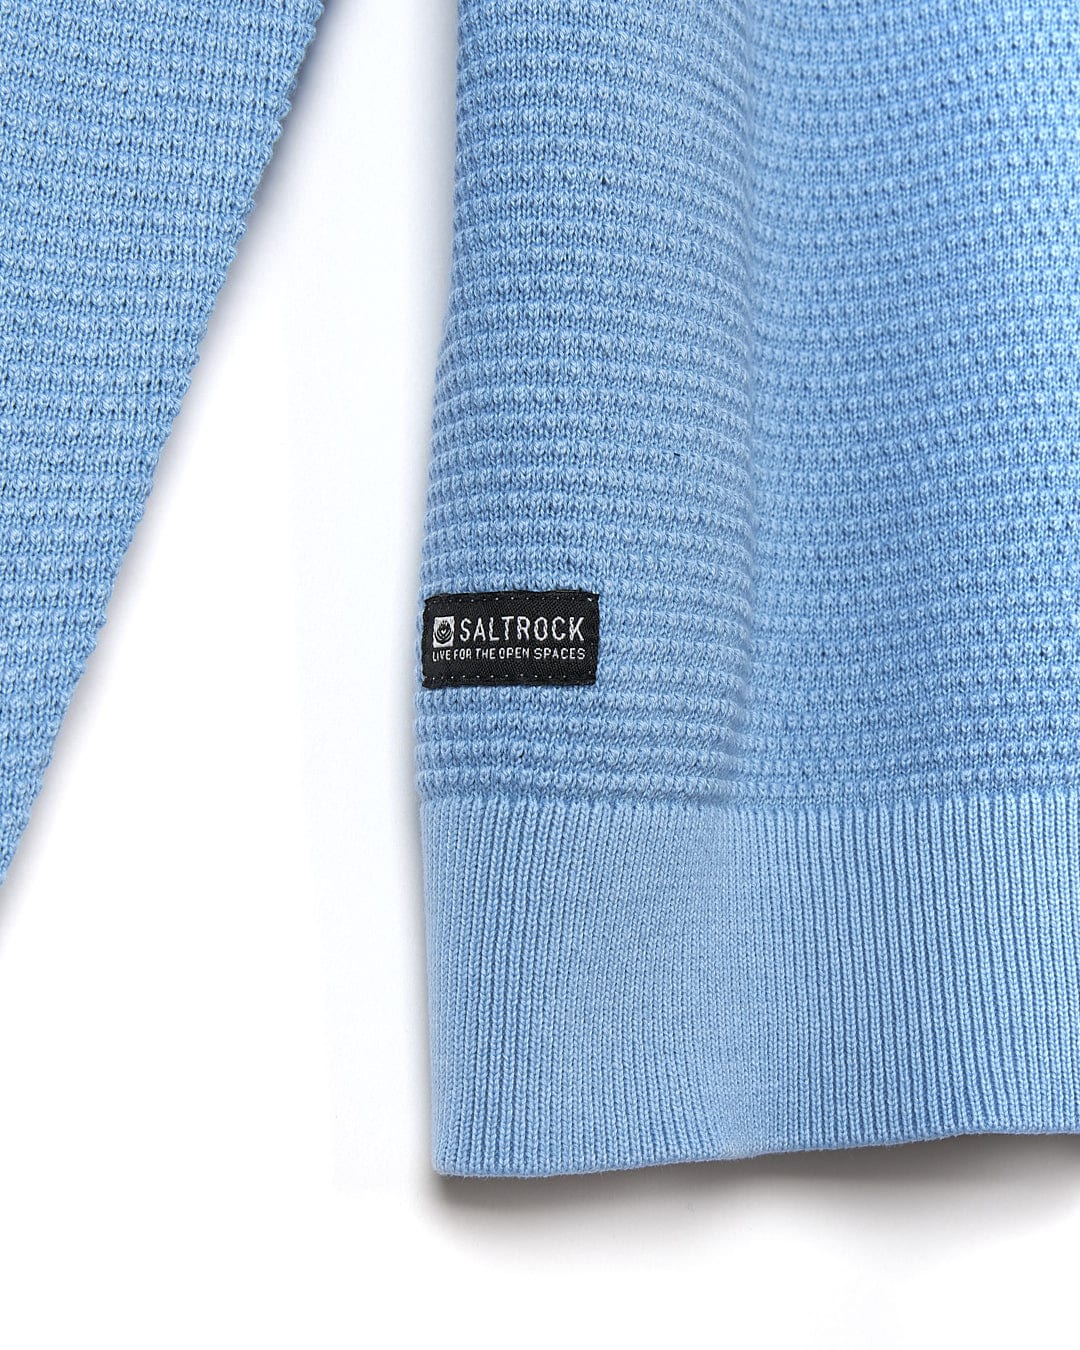 A close up of a Saltrock Moss - Mens Washed Knitted Crew - Light Blue sweater with a logo on it.